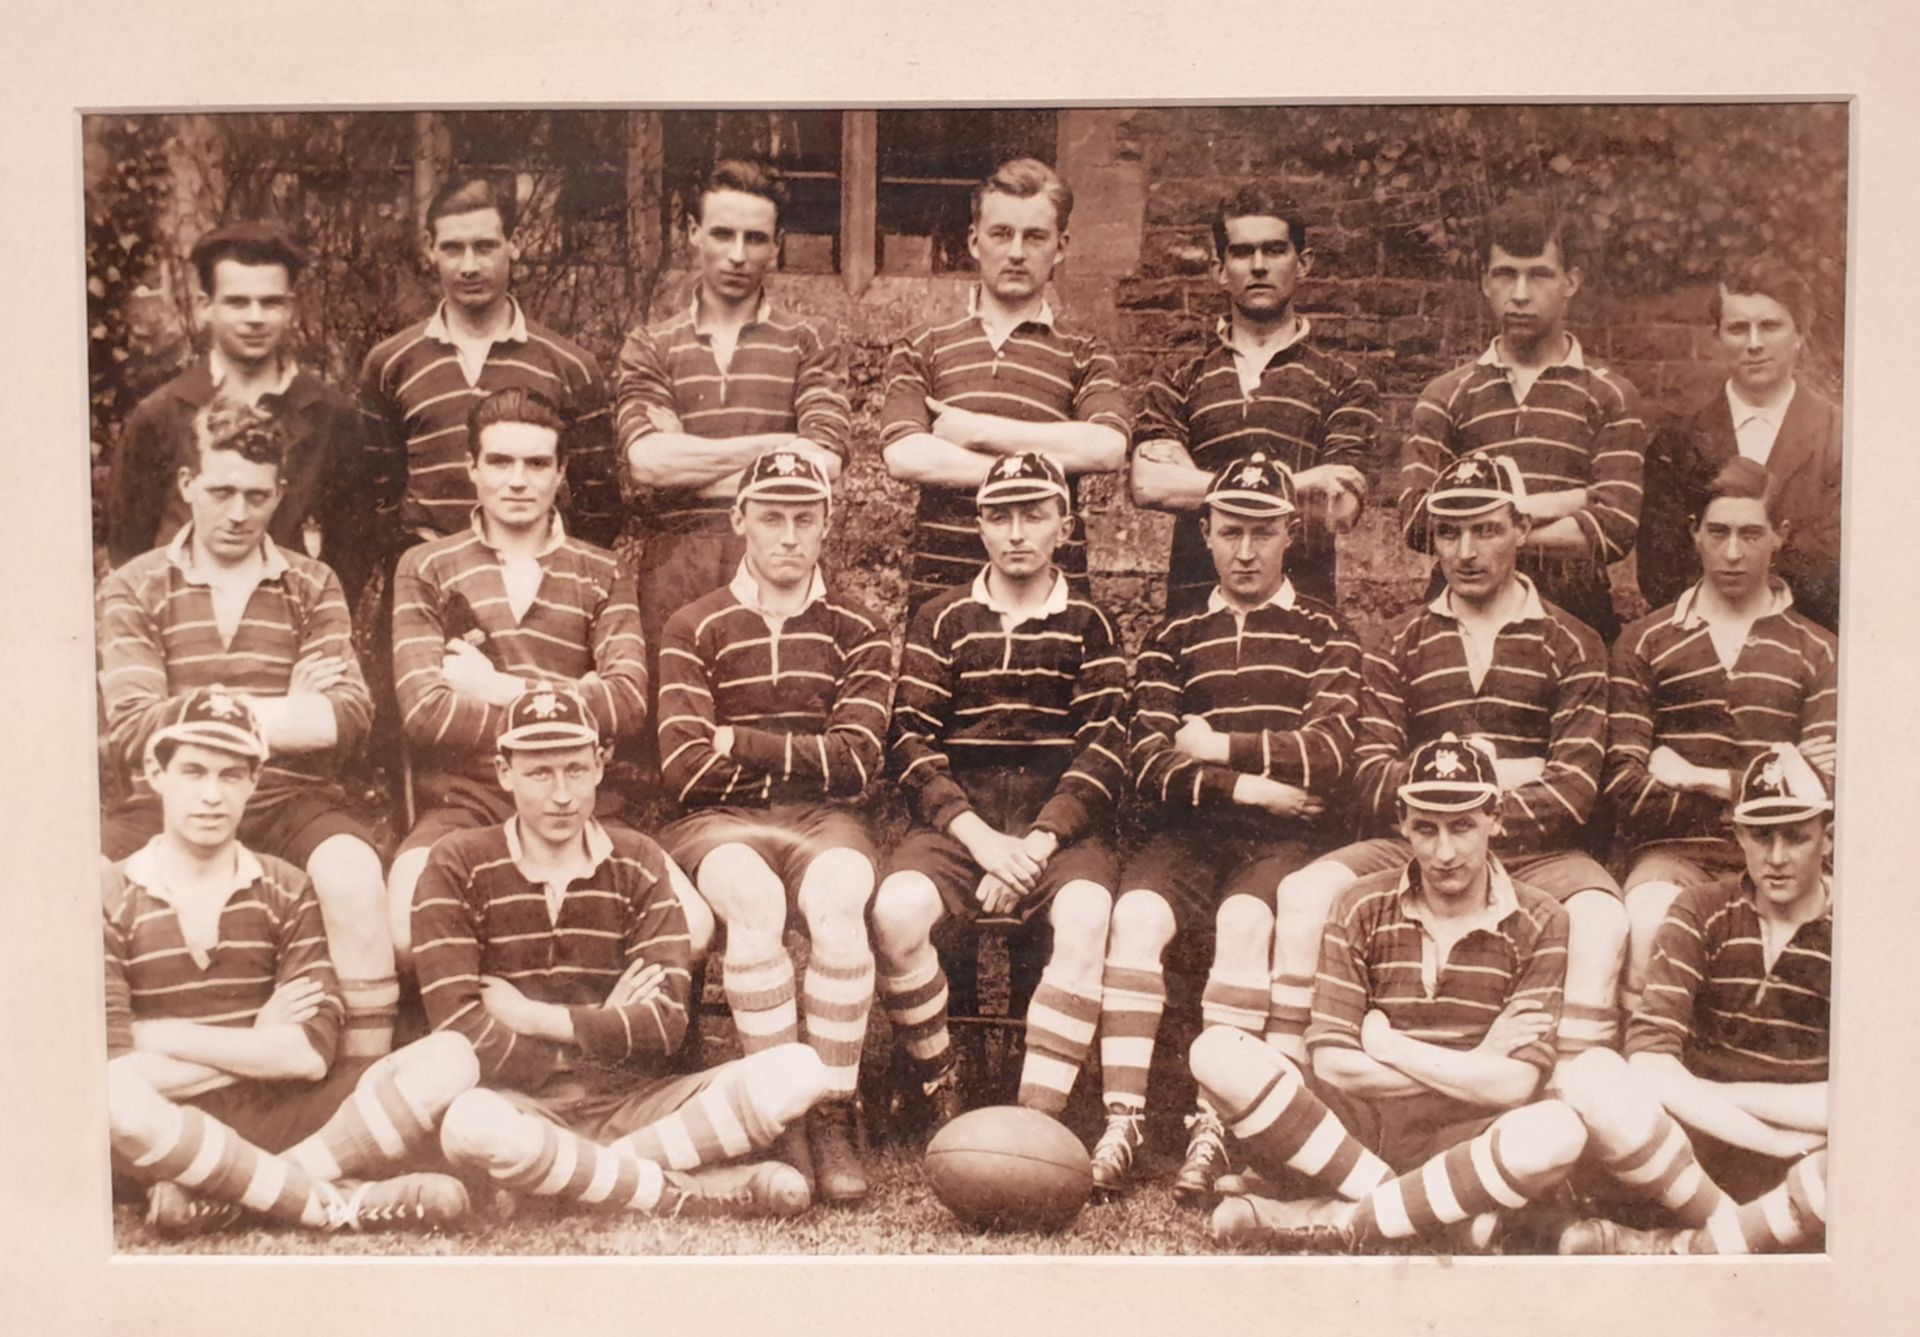 Framed Rugby Team Picture. Approx Dimensions 18 1/2" x 14 1/2". - Image 2 of 3